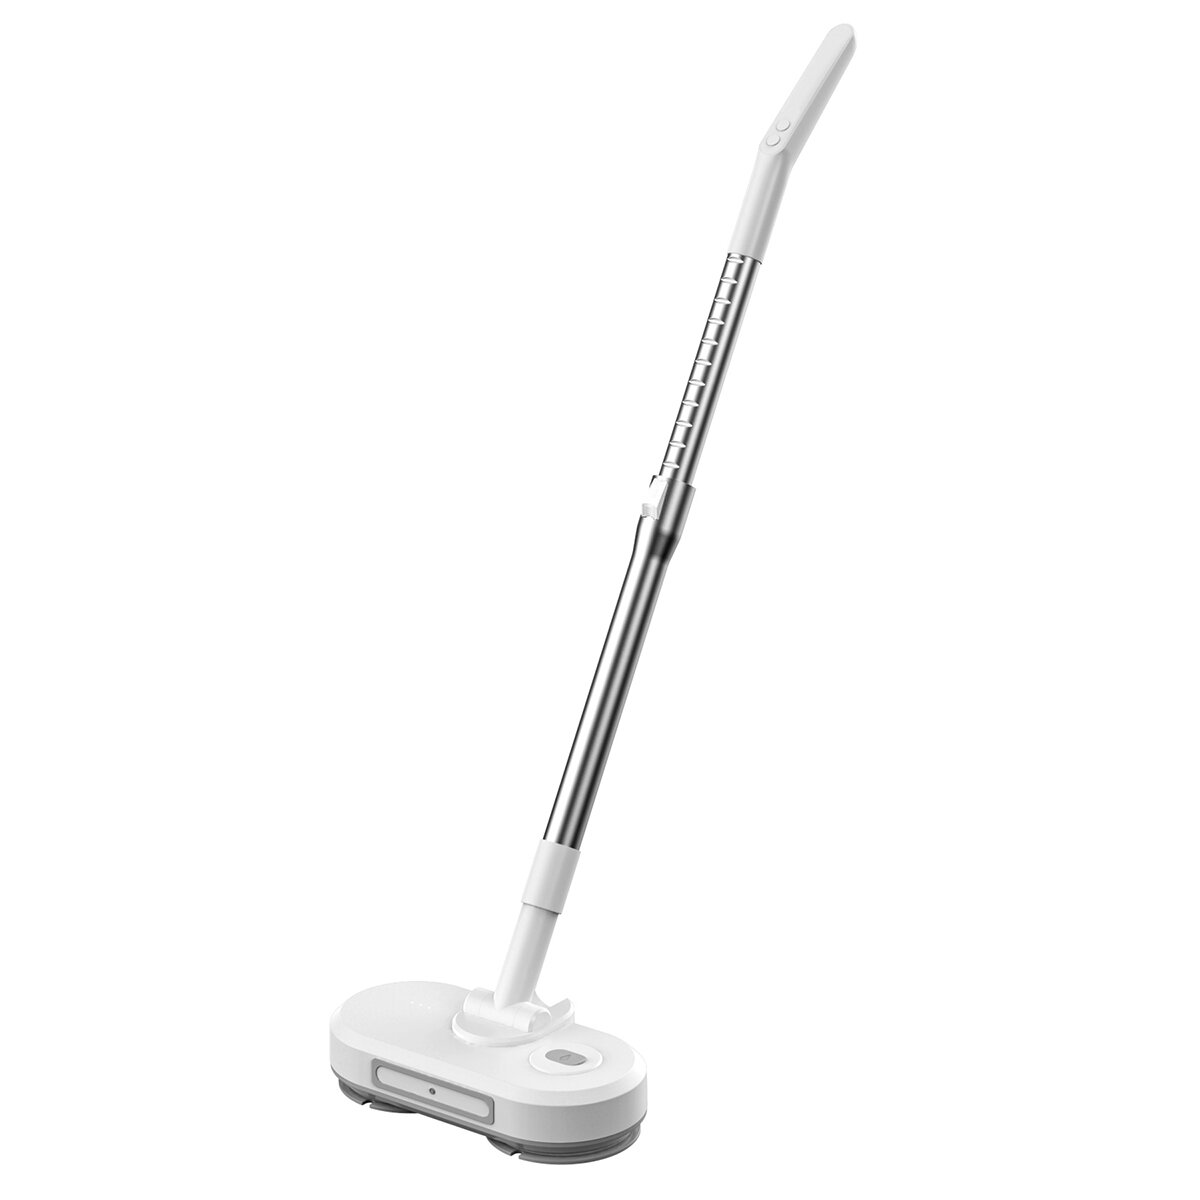 best price,enlif,fg20,electric,wireless,spin,mop,eu,discount